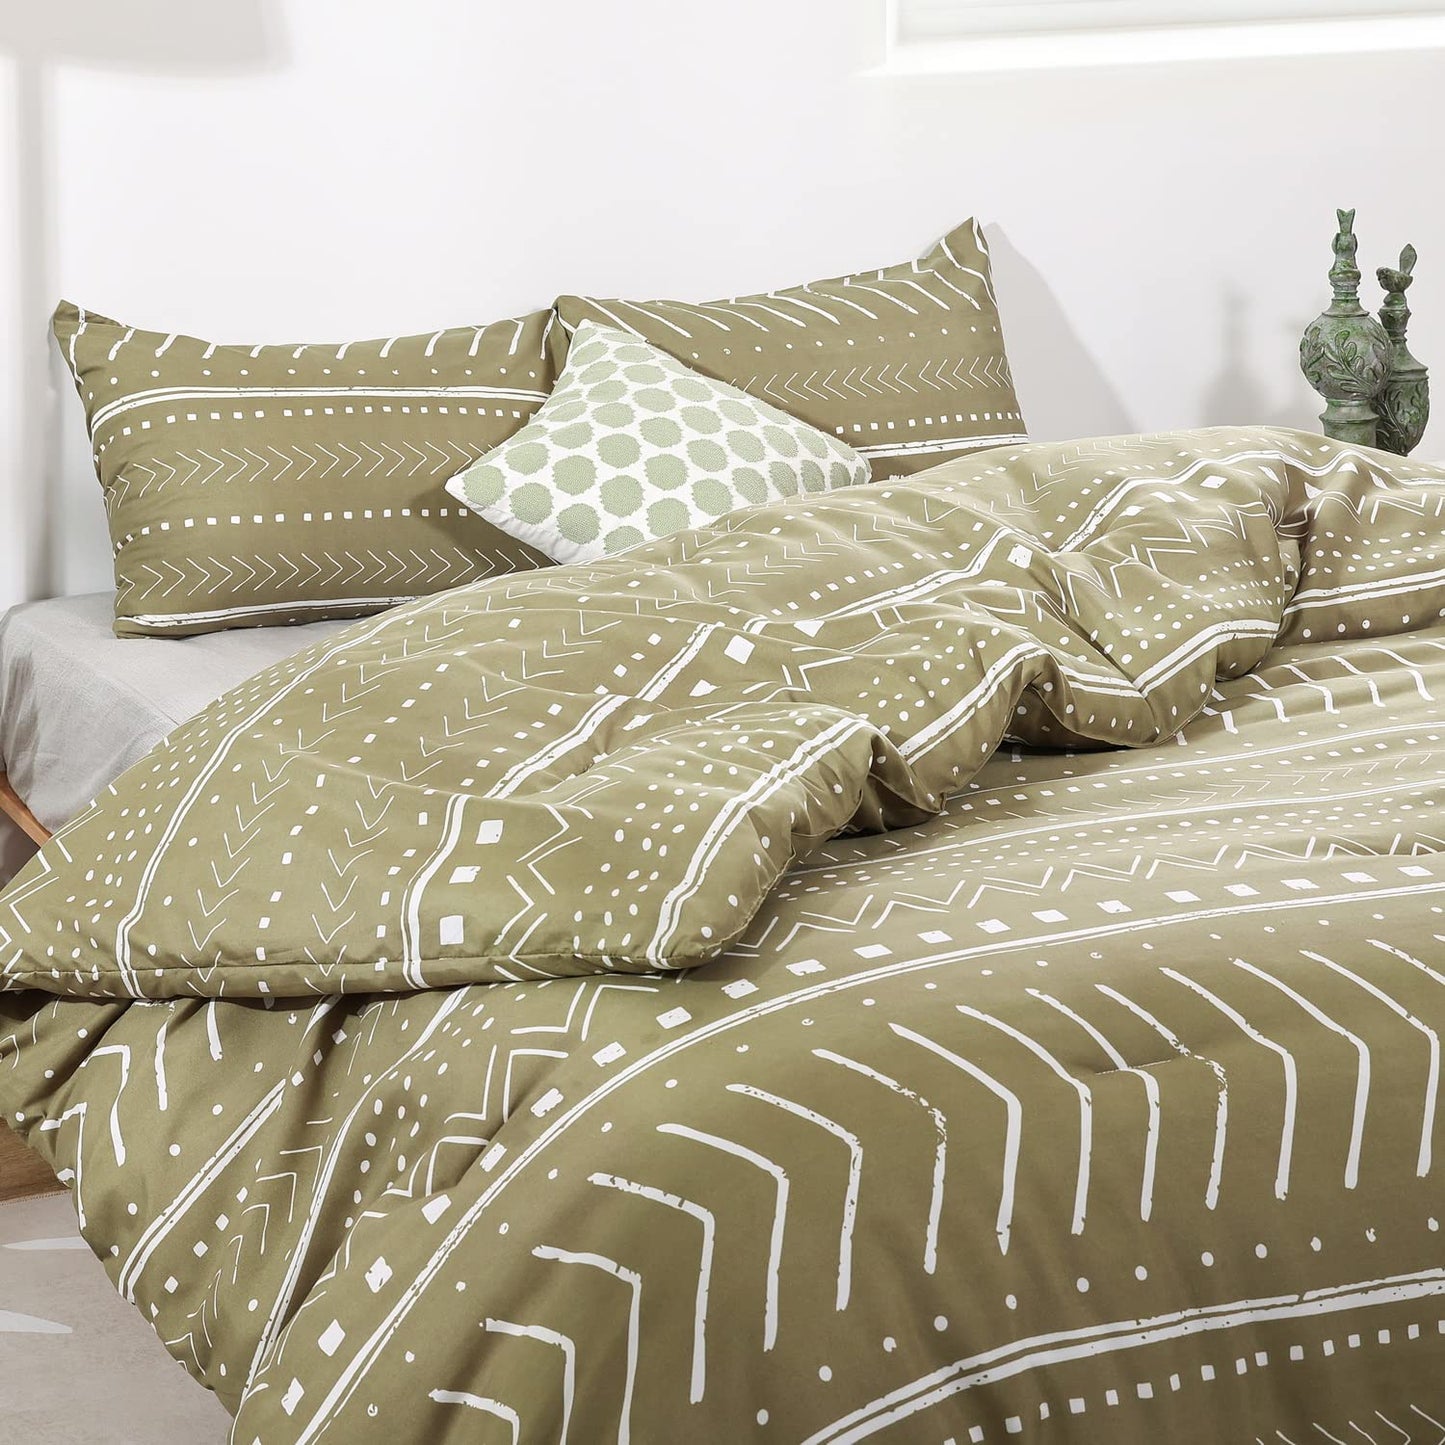 Folkloric Art Pattern Bedding with Soft Microfiber Fill Bedding, 1 Comforter & 2 Pillowcases